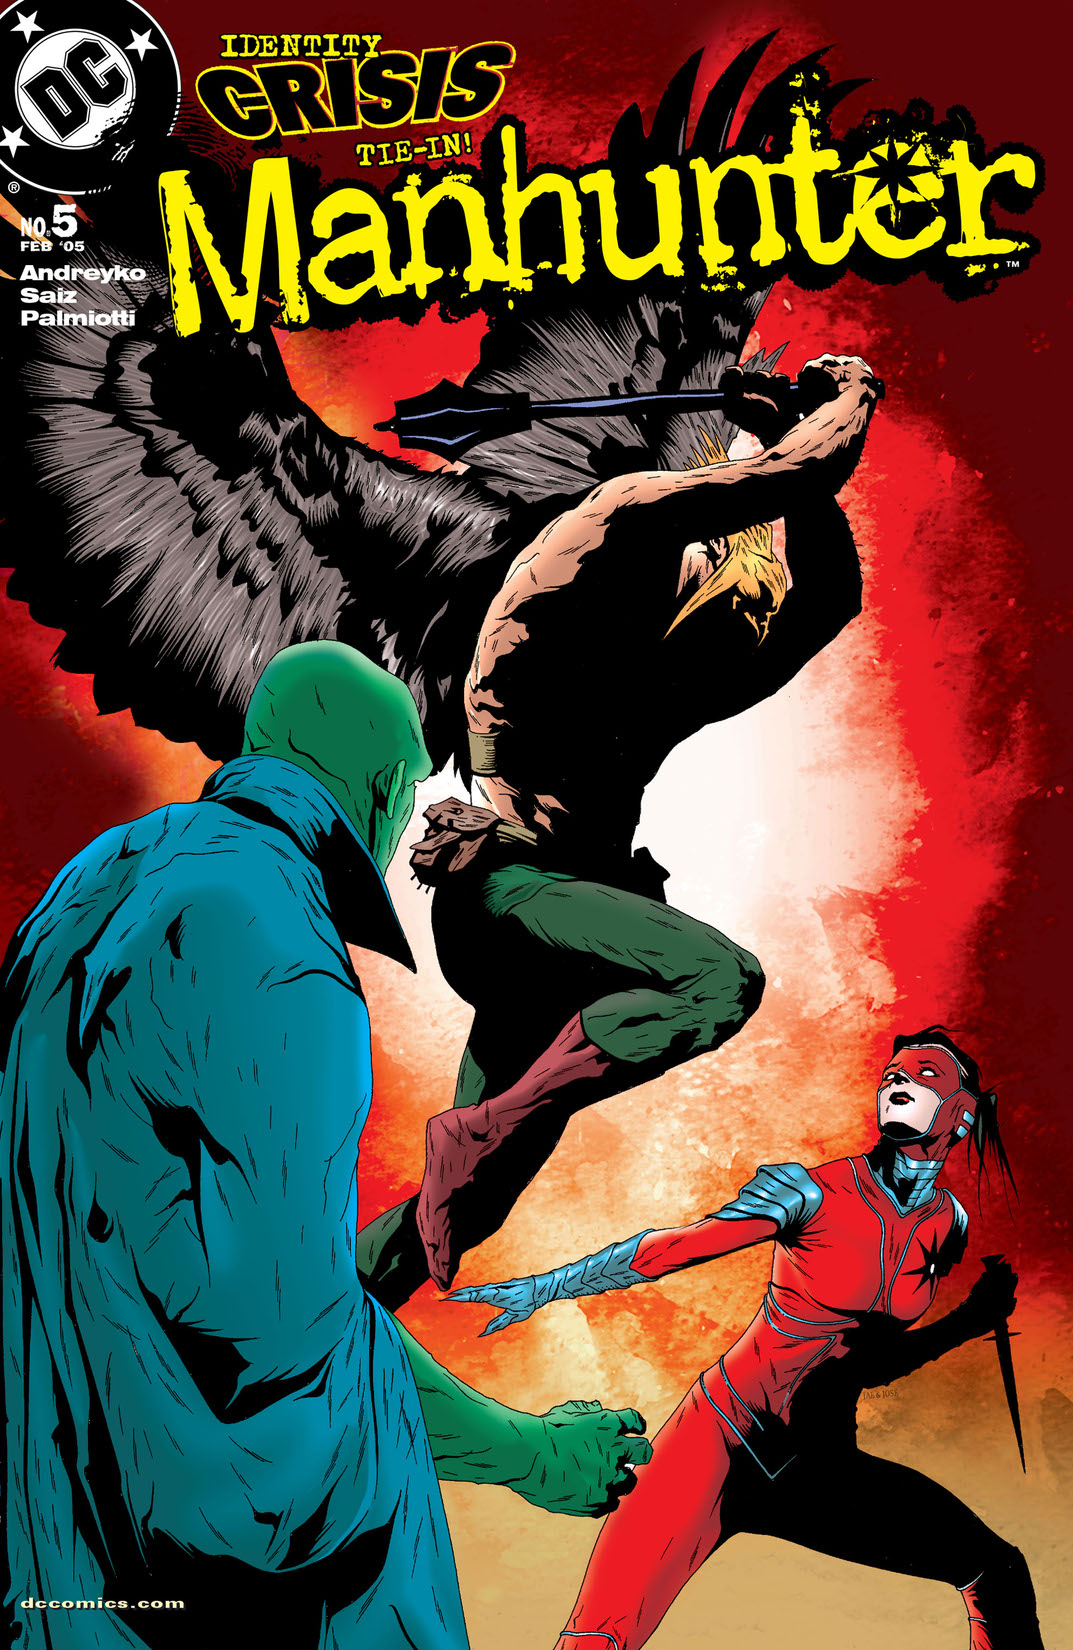 Manhunter (2004-) #5 preview images